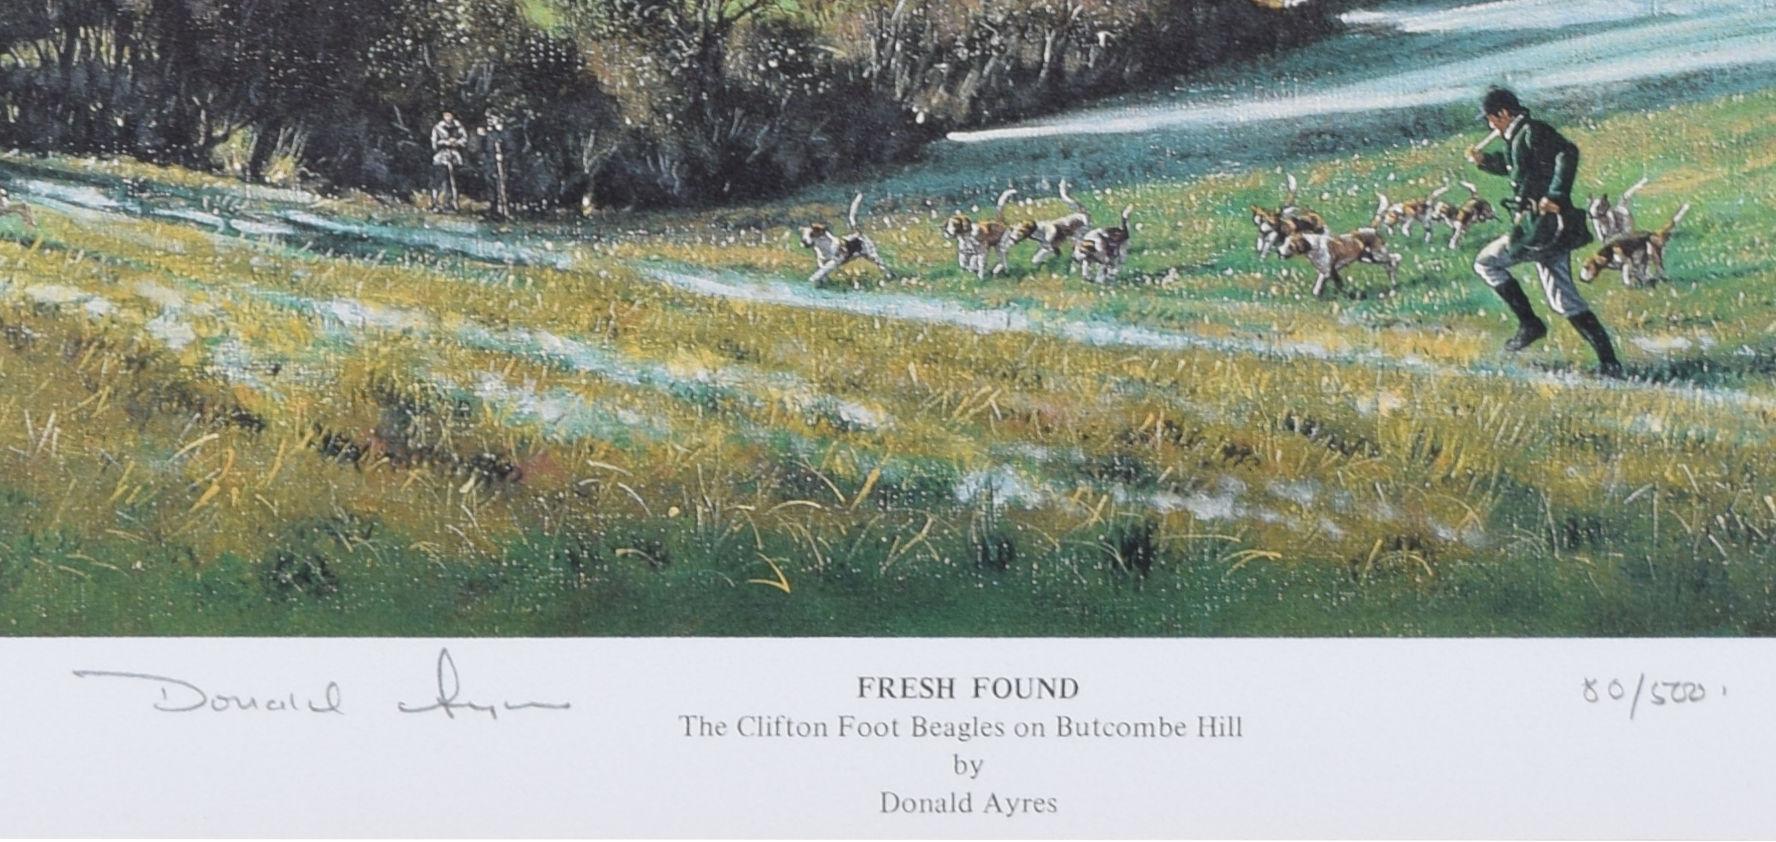 The Clifton Foot Beagles on Butcombe Hill hunting lithograph by Donald Ayres For Sale 1